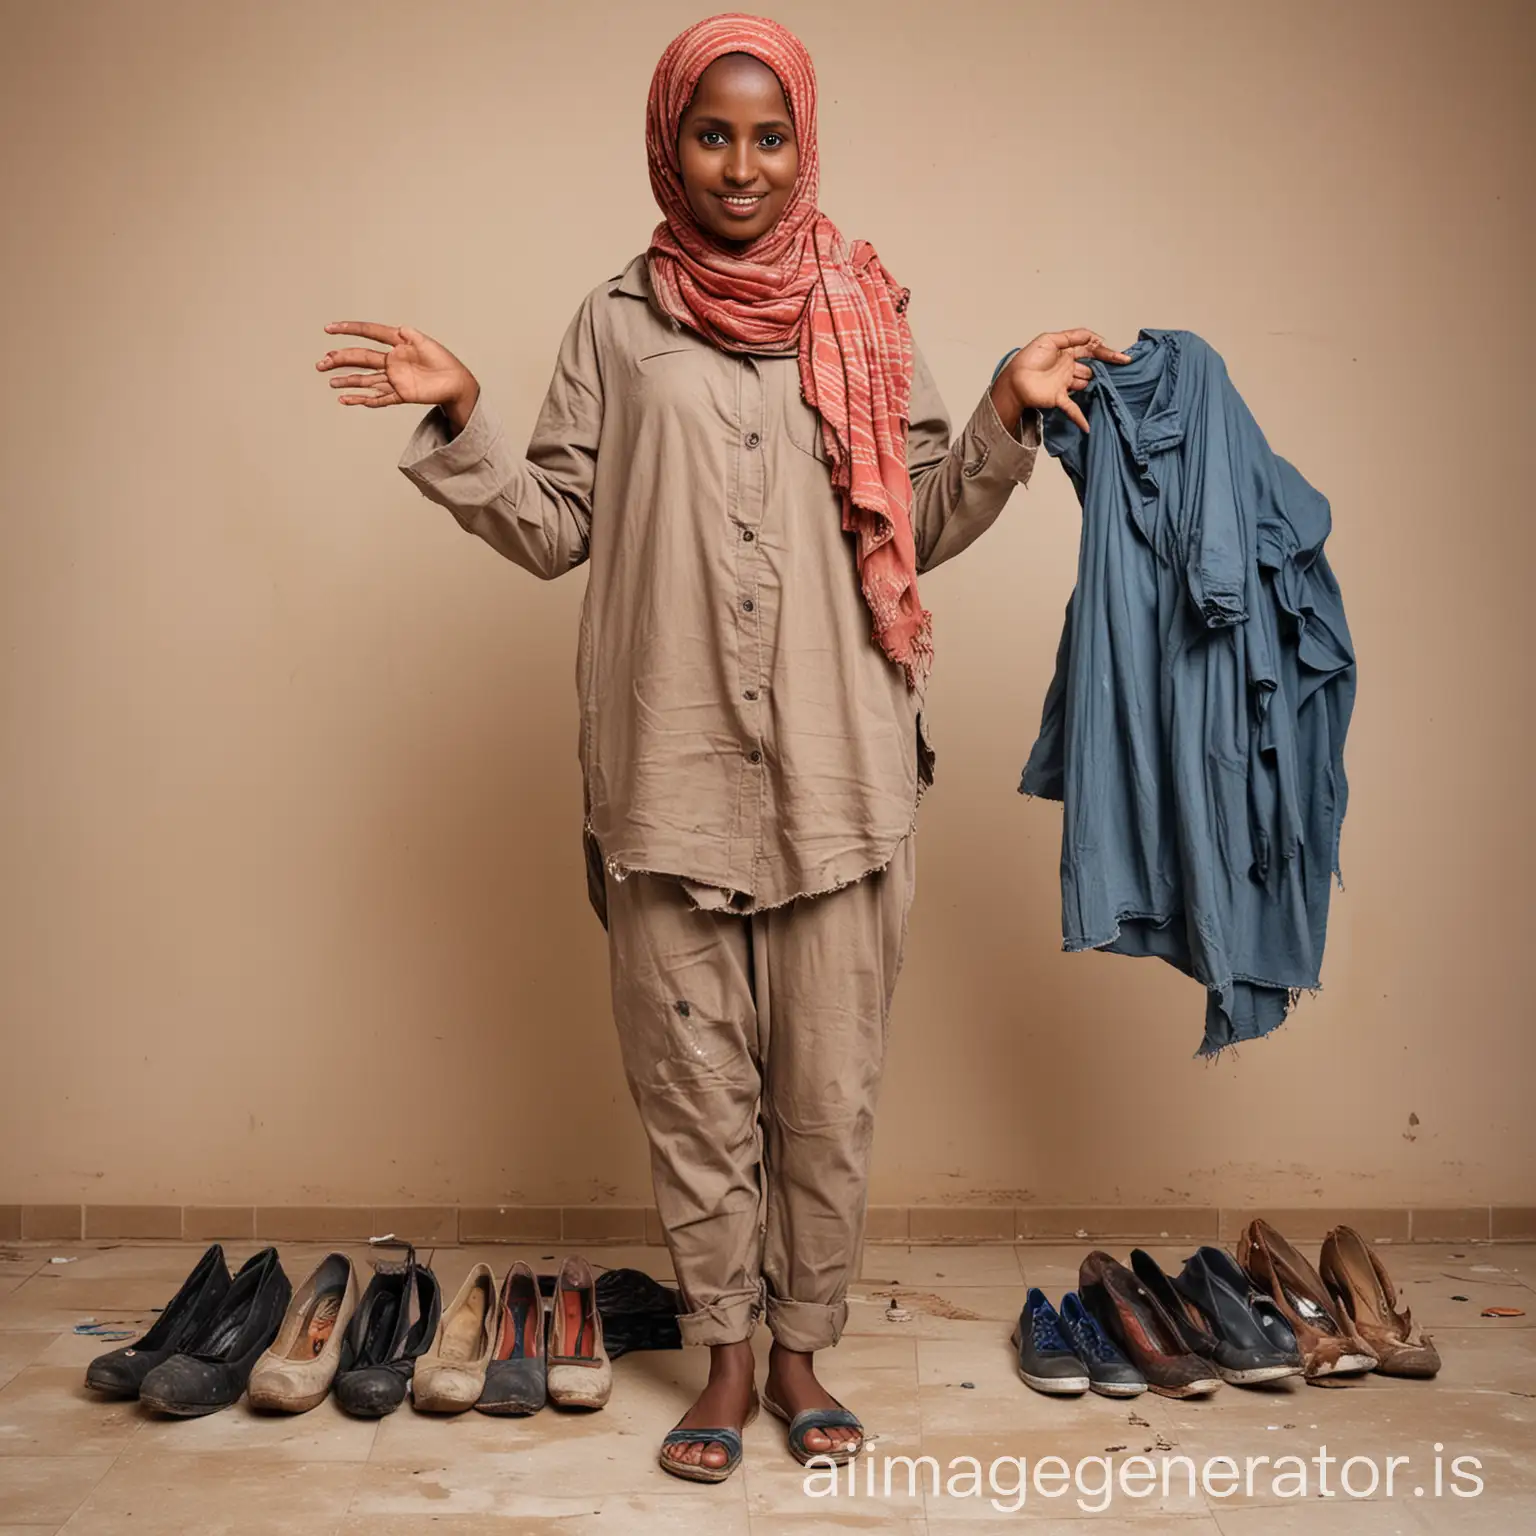 Somali-Woman-in-TPose-with-Dirty-Clothes-and-Shoes